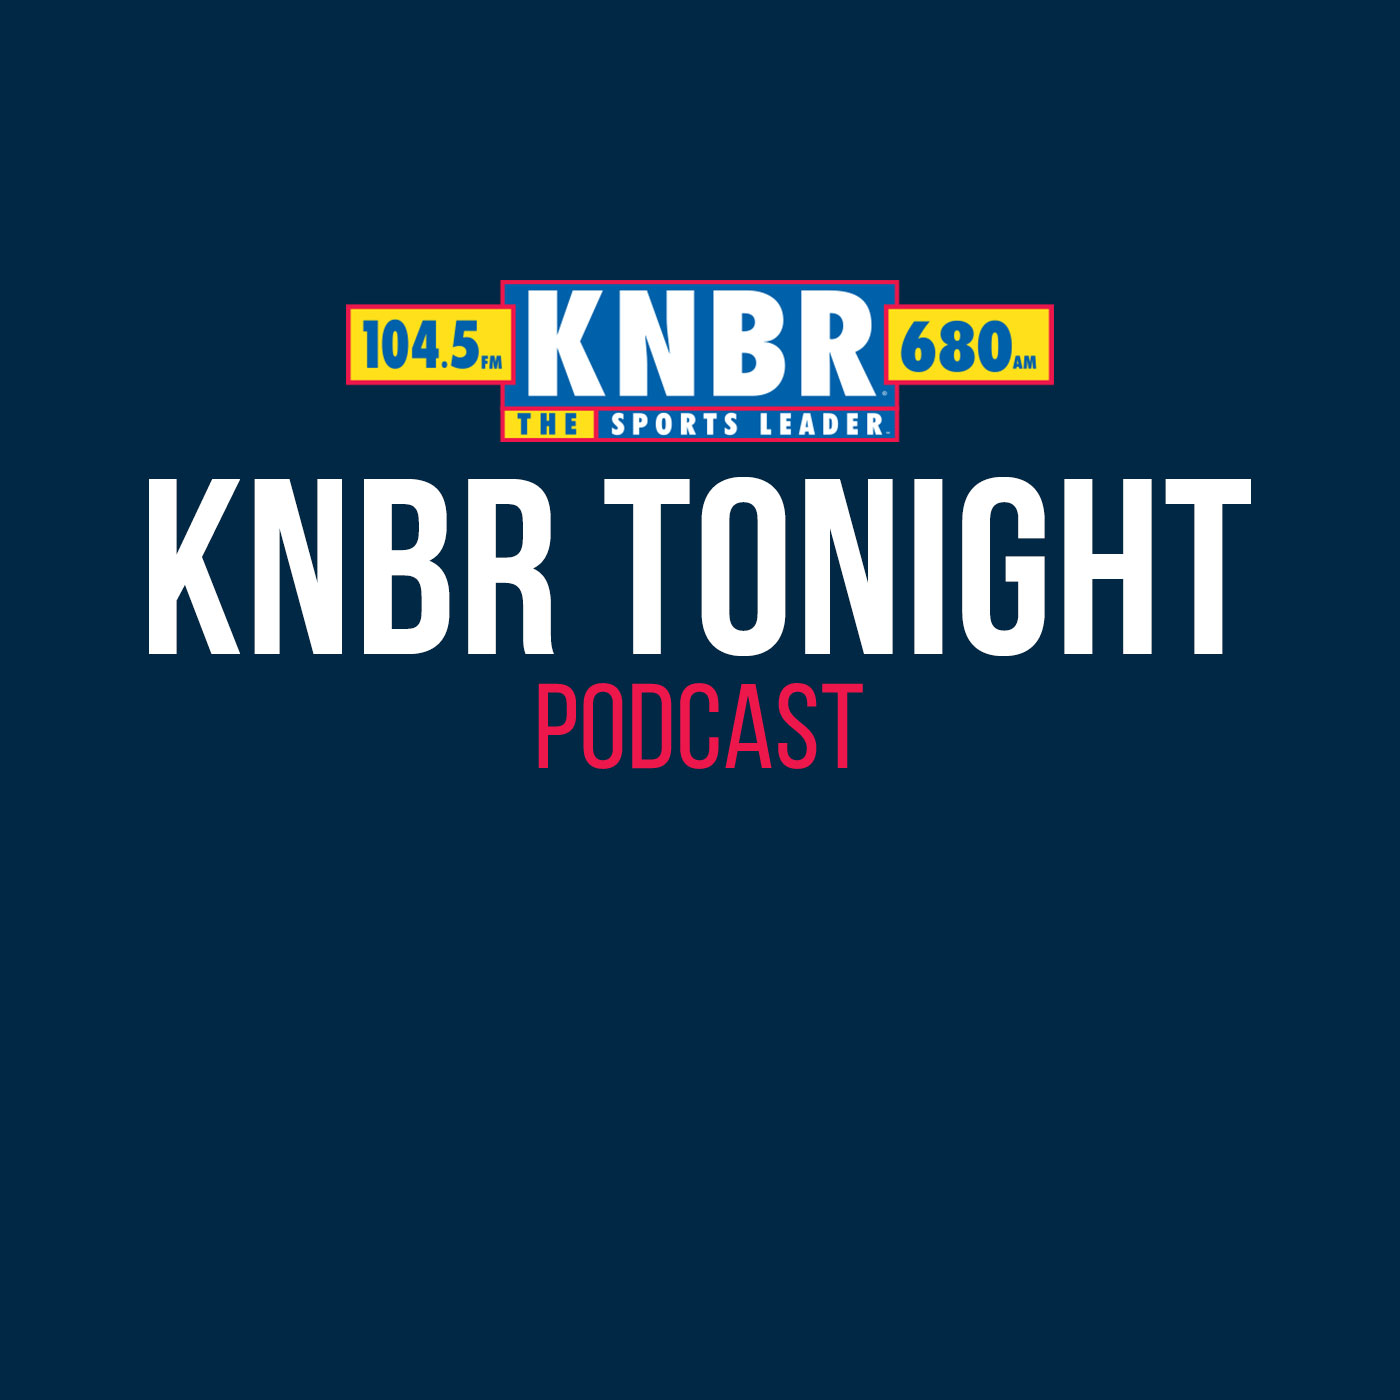 11-17 Jennifer Lee Chan joins KNBR Tonight with F.P Santangelo to discuss the 49ers bounce back win against the Jaguars and help preview the upcoming matchup against the Buccaneers